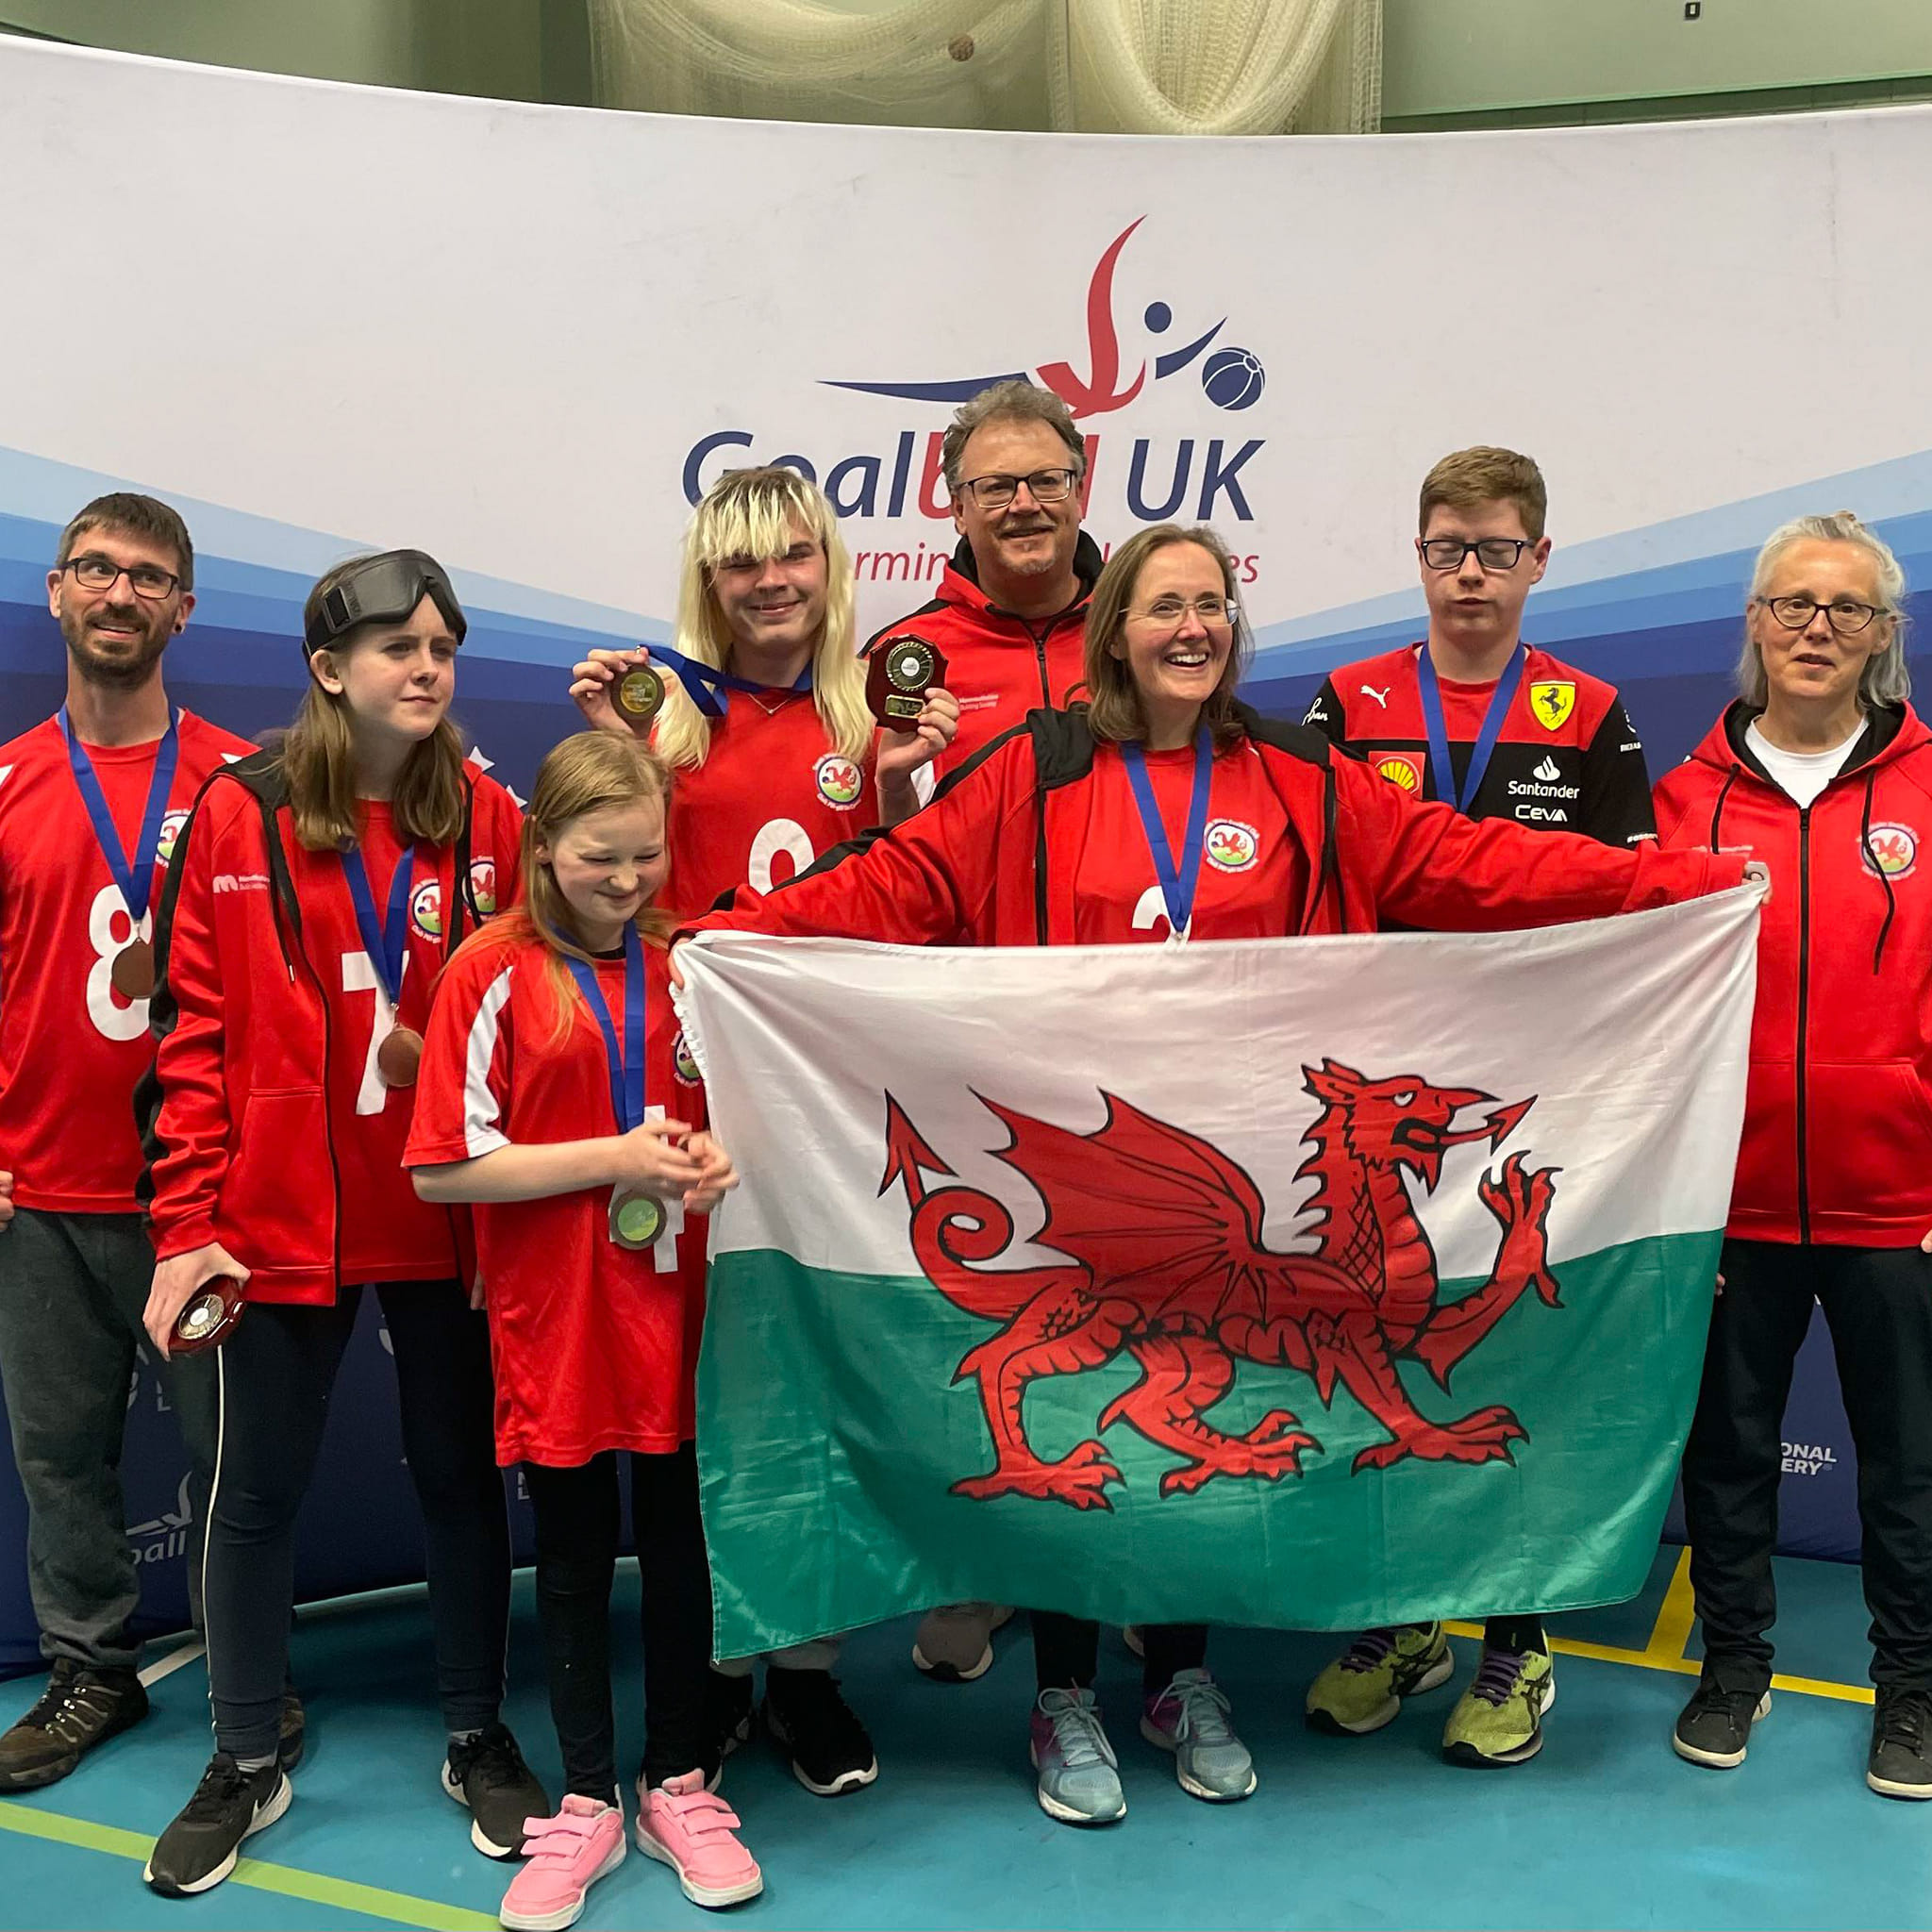 Group pic of the South Wales Goalball Club - they are all wearing red jerseys and holding up the flag of Wales